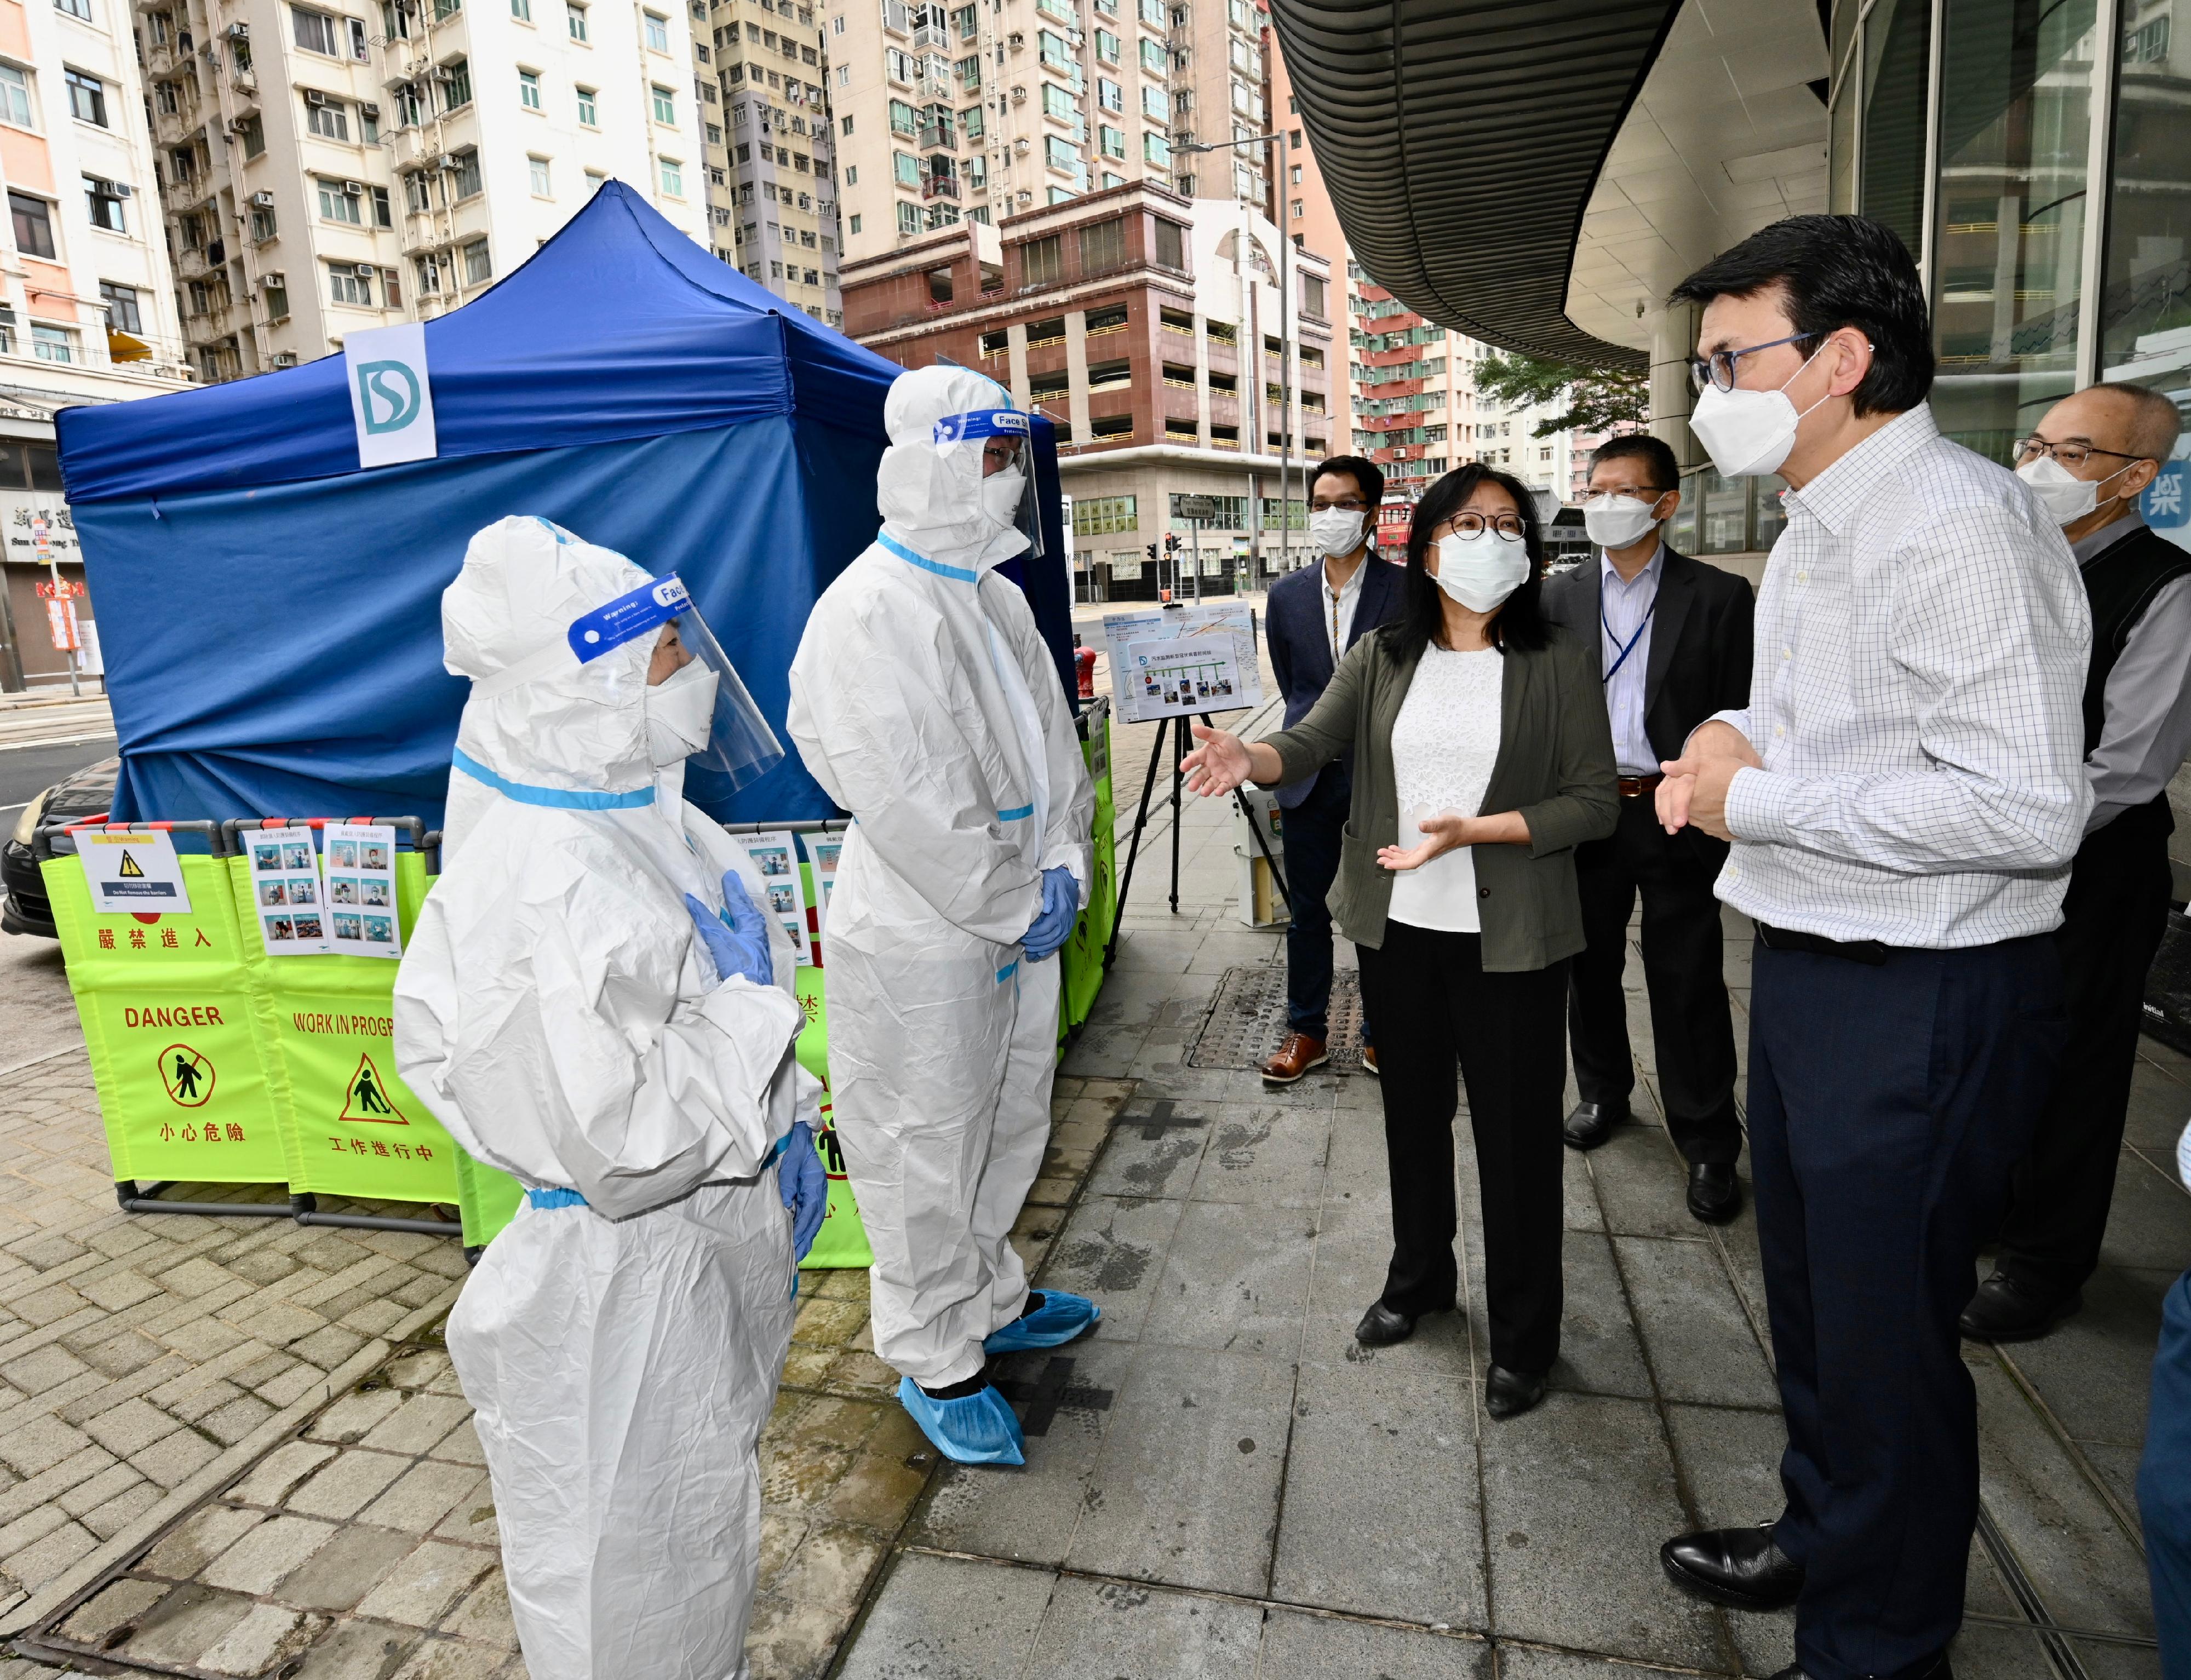 The Secretary for Commerce and Economic Development, Mr Edward Yau (second right), inspected a stationary sewage sampling site in Kennedy Town today (March 17) to understand the anti-epidemic work of frontline workers and the protective equipment needed. Looking on is the Director of Drainage Services, Ms Alice Pang (fourth right).